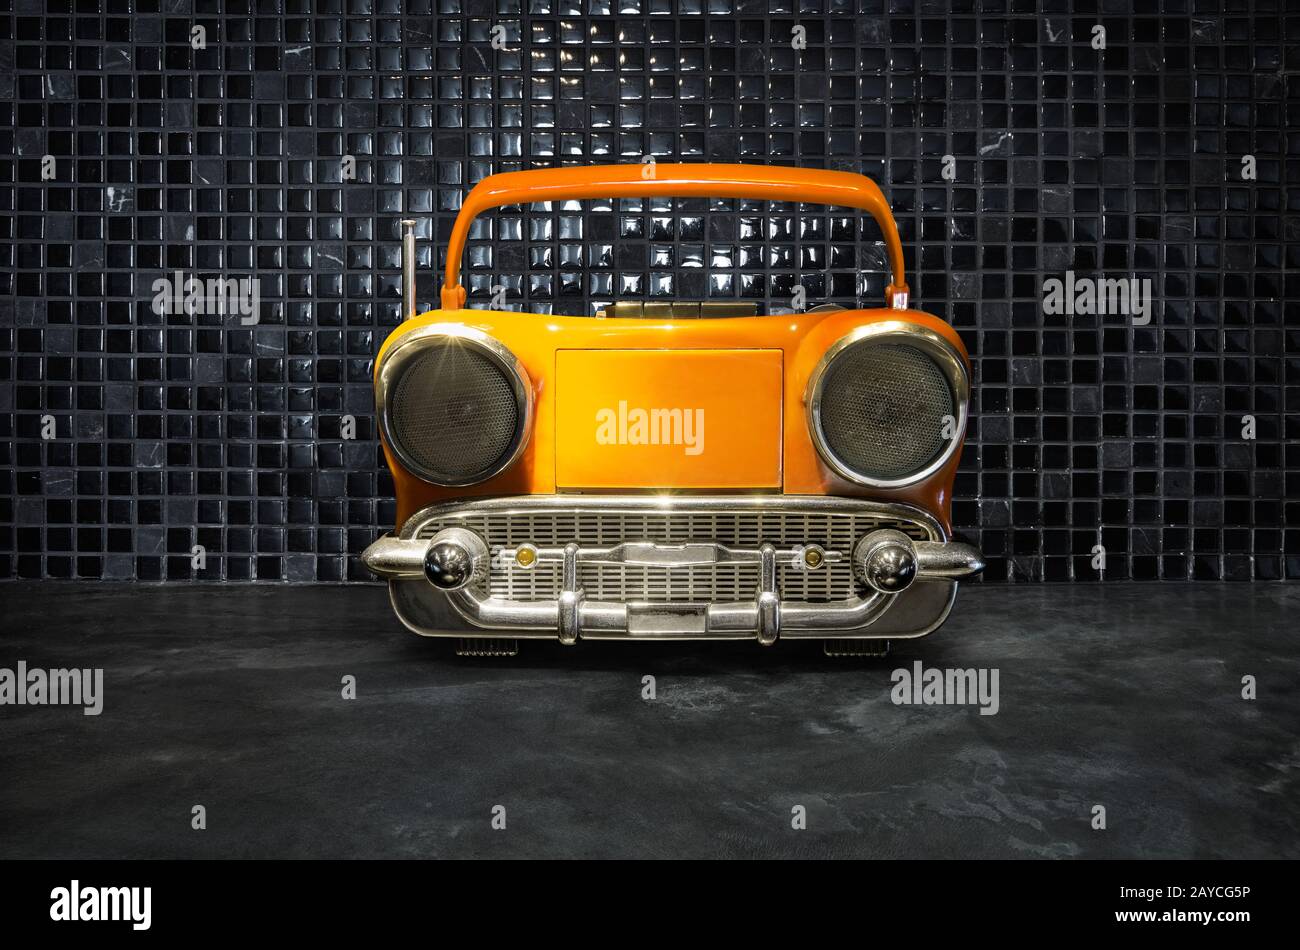 Old antique car shape AM FM stereo cassette player on mosaic tiles background Stock Photo